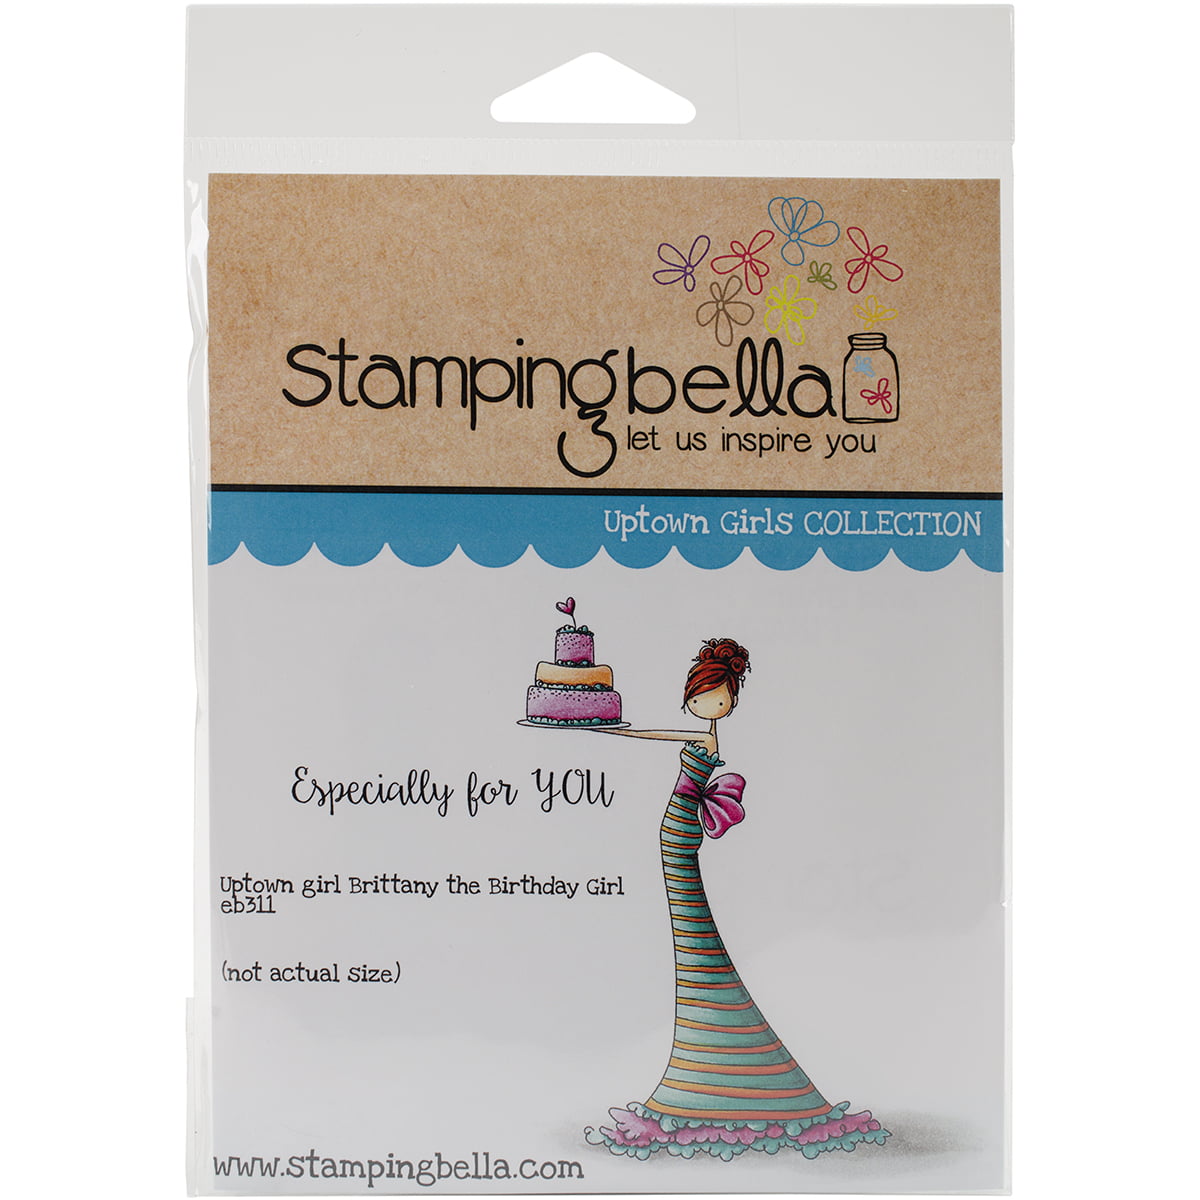 Stamping Bella Uptown Girl Audrey Loves Her Makeup Cling Rubber Stamp 6.5 x 4.5